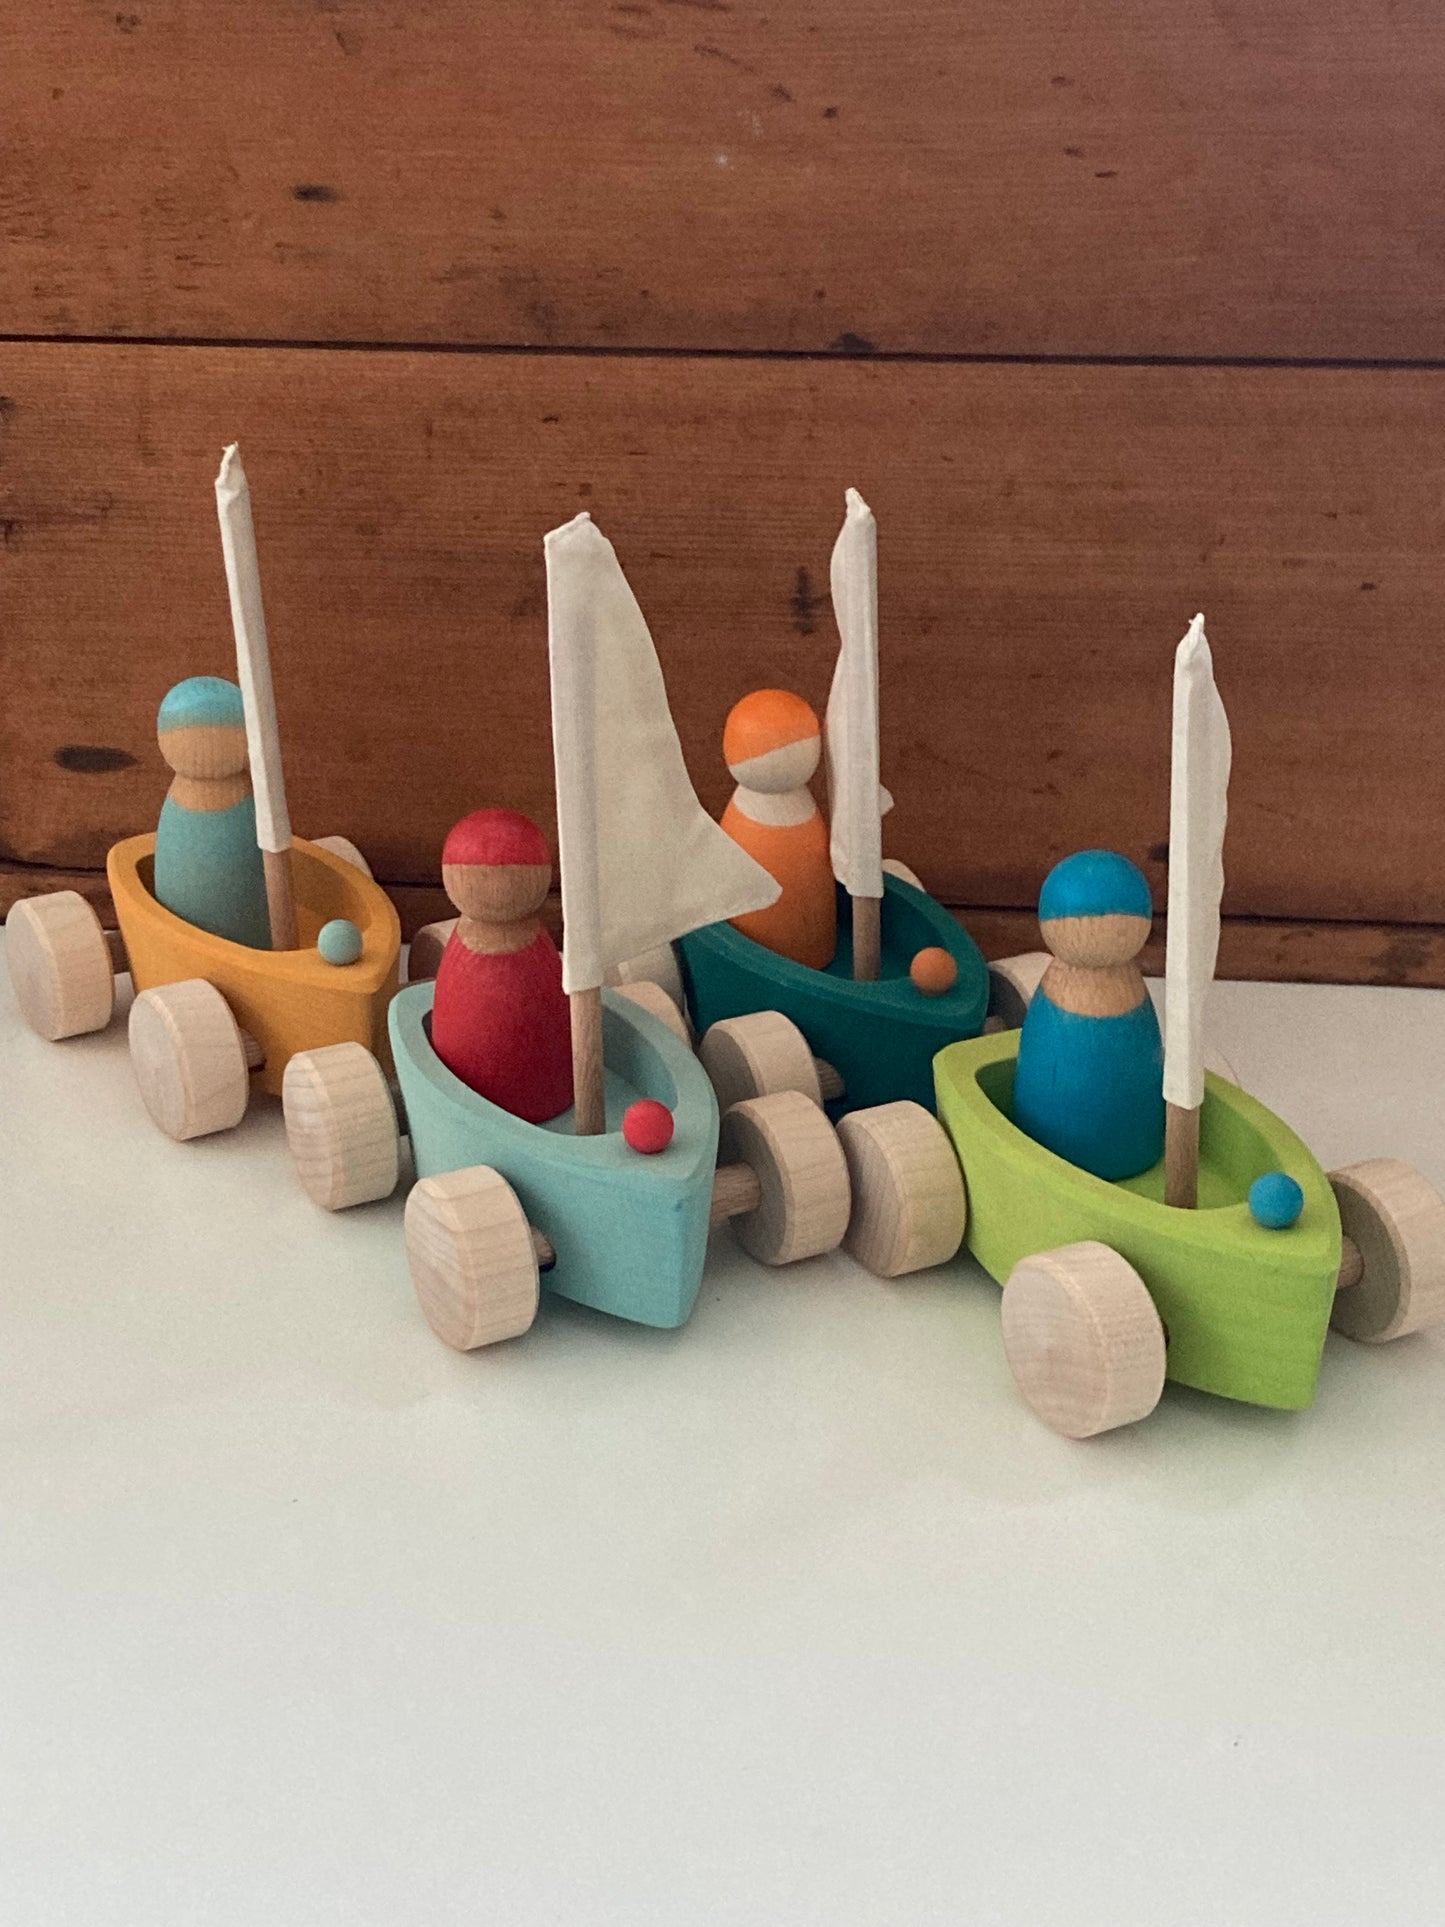 Wooden Toy - SAILBOAT in EVERGREEN and SKIPPER in ORANGE… on wheels!